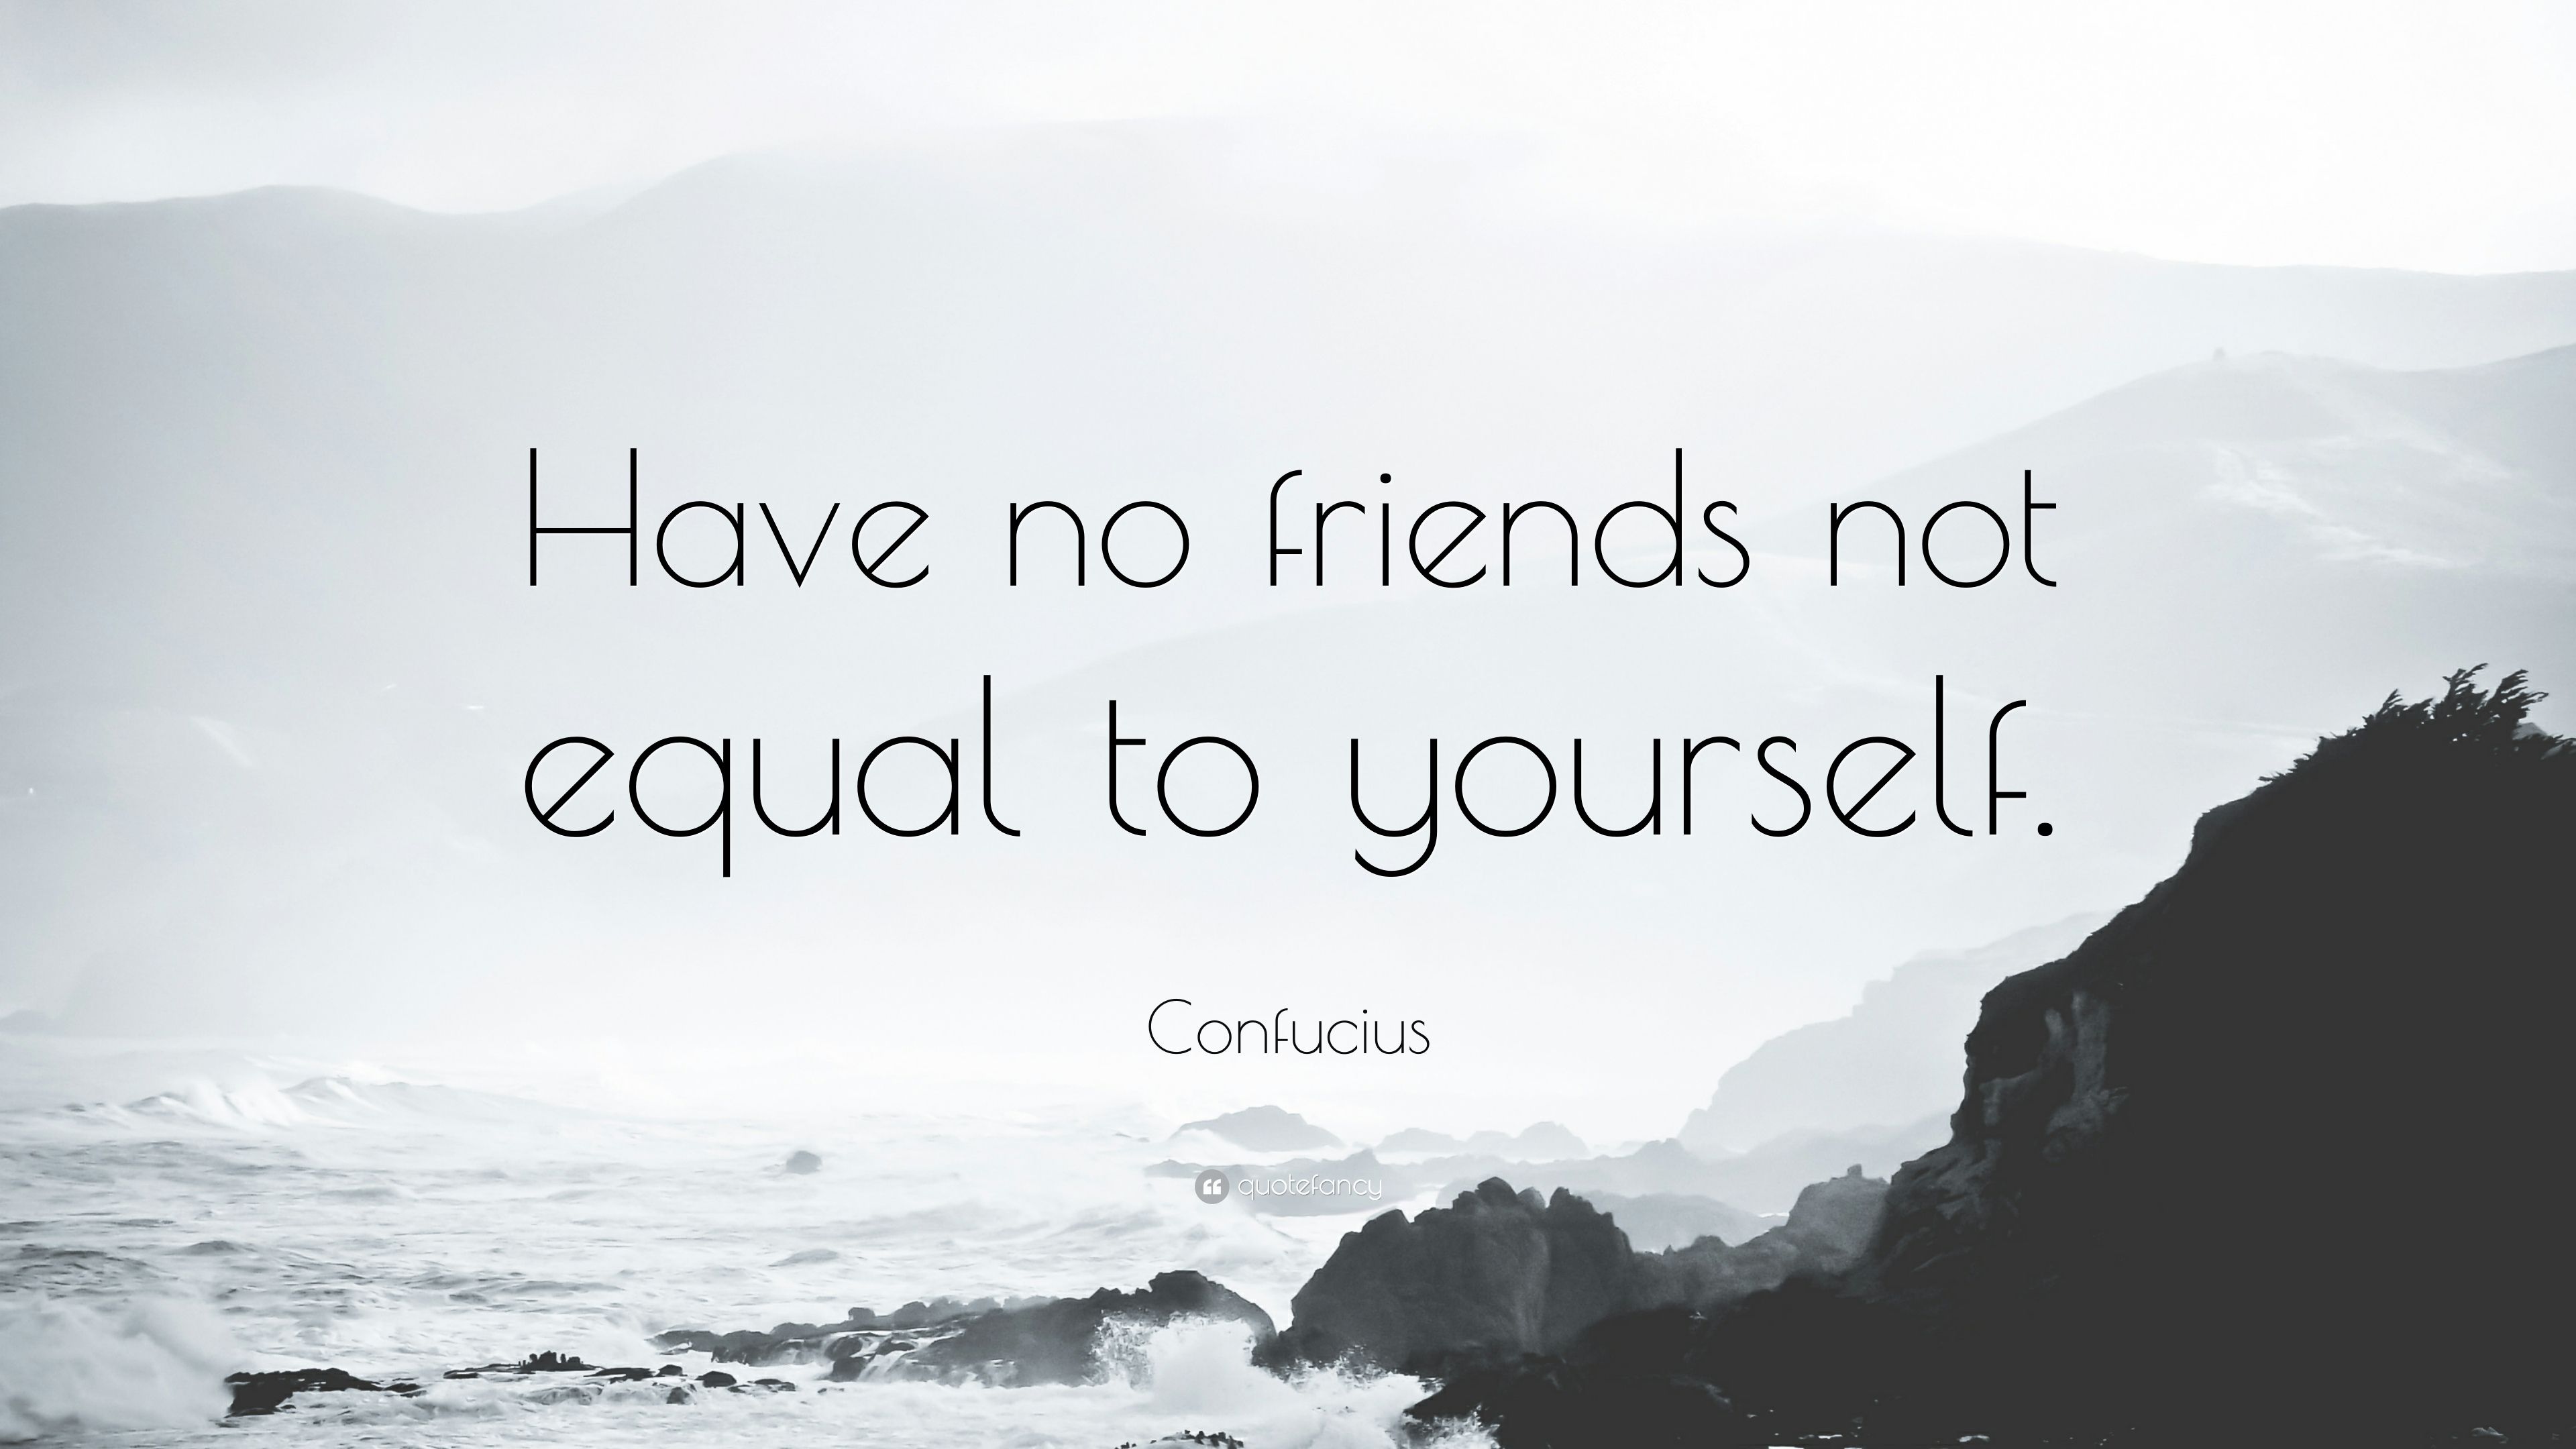 Confucius Quote: “Have no friends not equal to yourself.” (12 wallpaper)